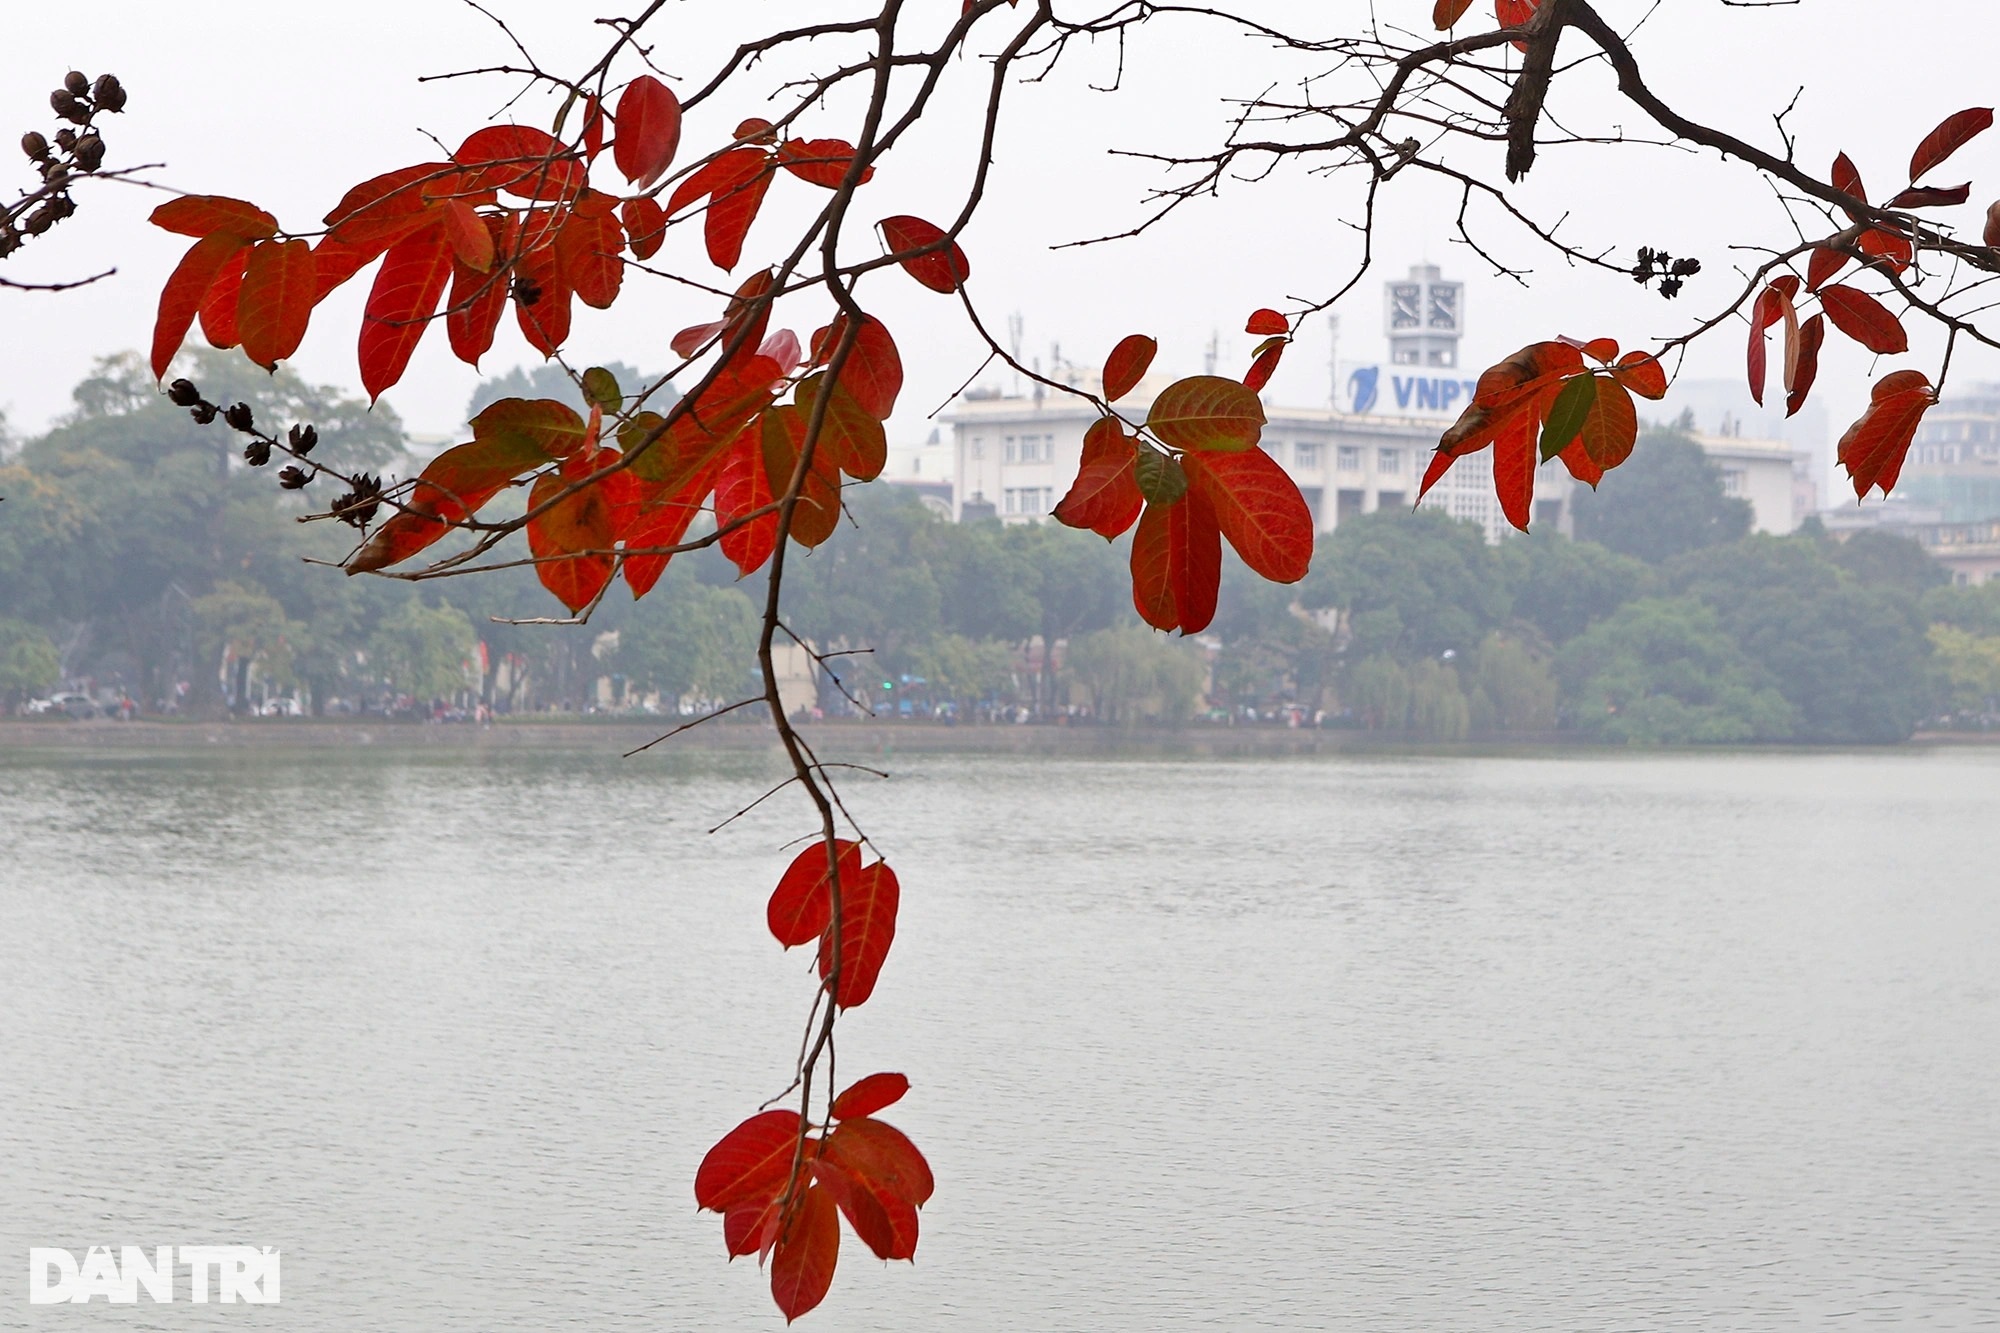 Hanoi is golden in the season when the trees change leaves, young people flock to take pictures - 14